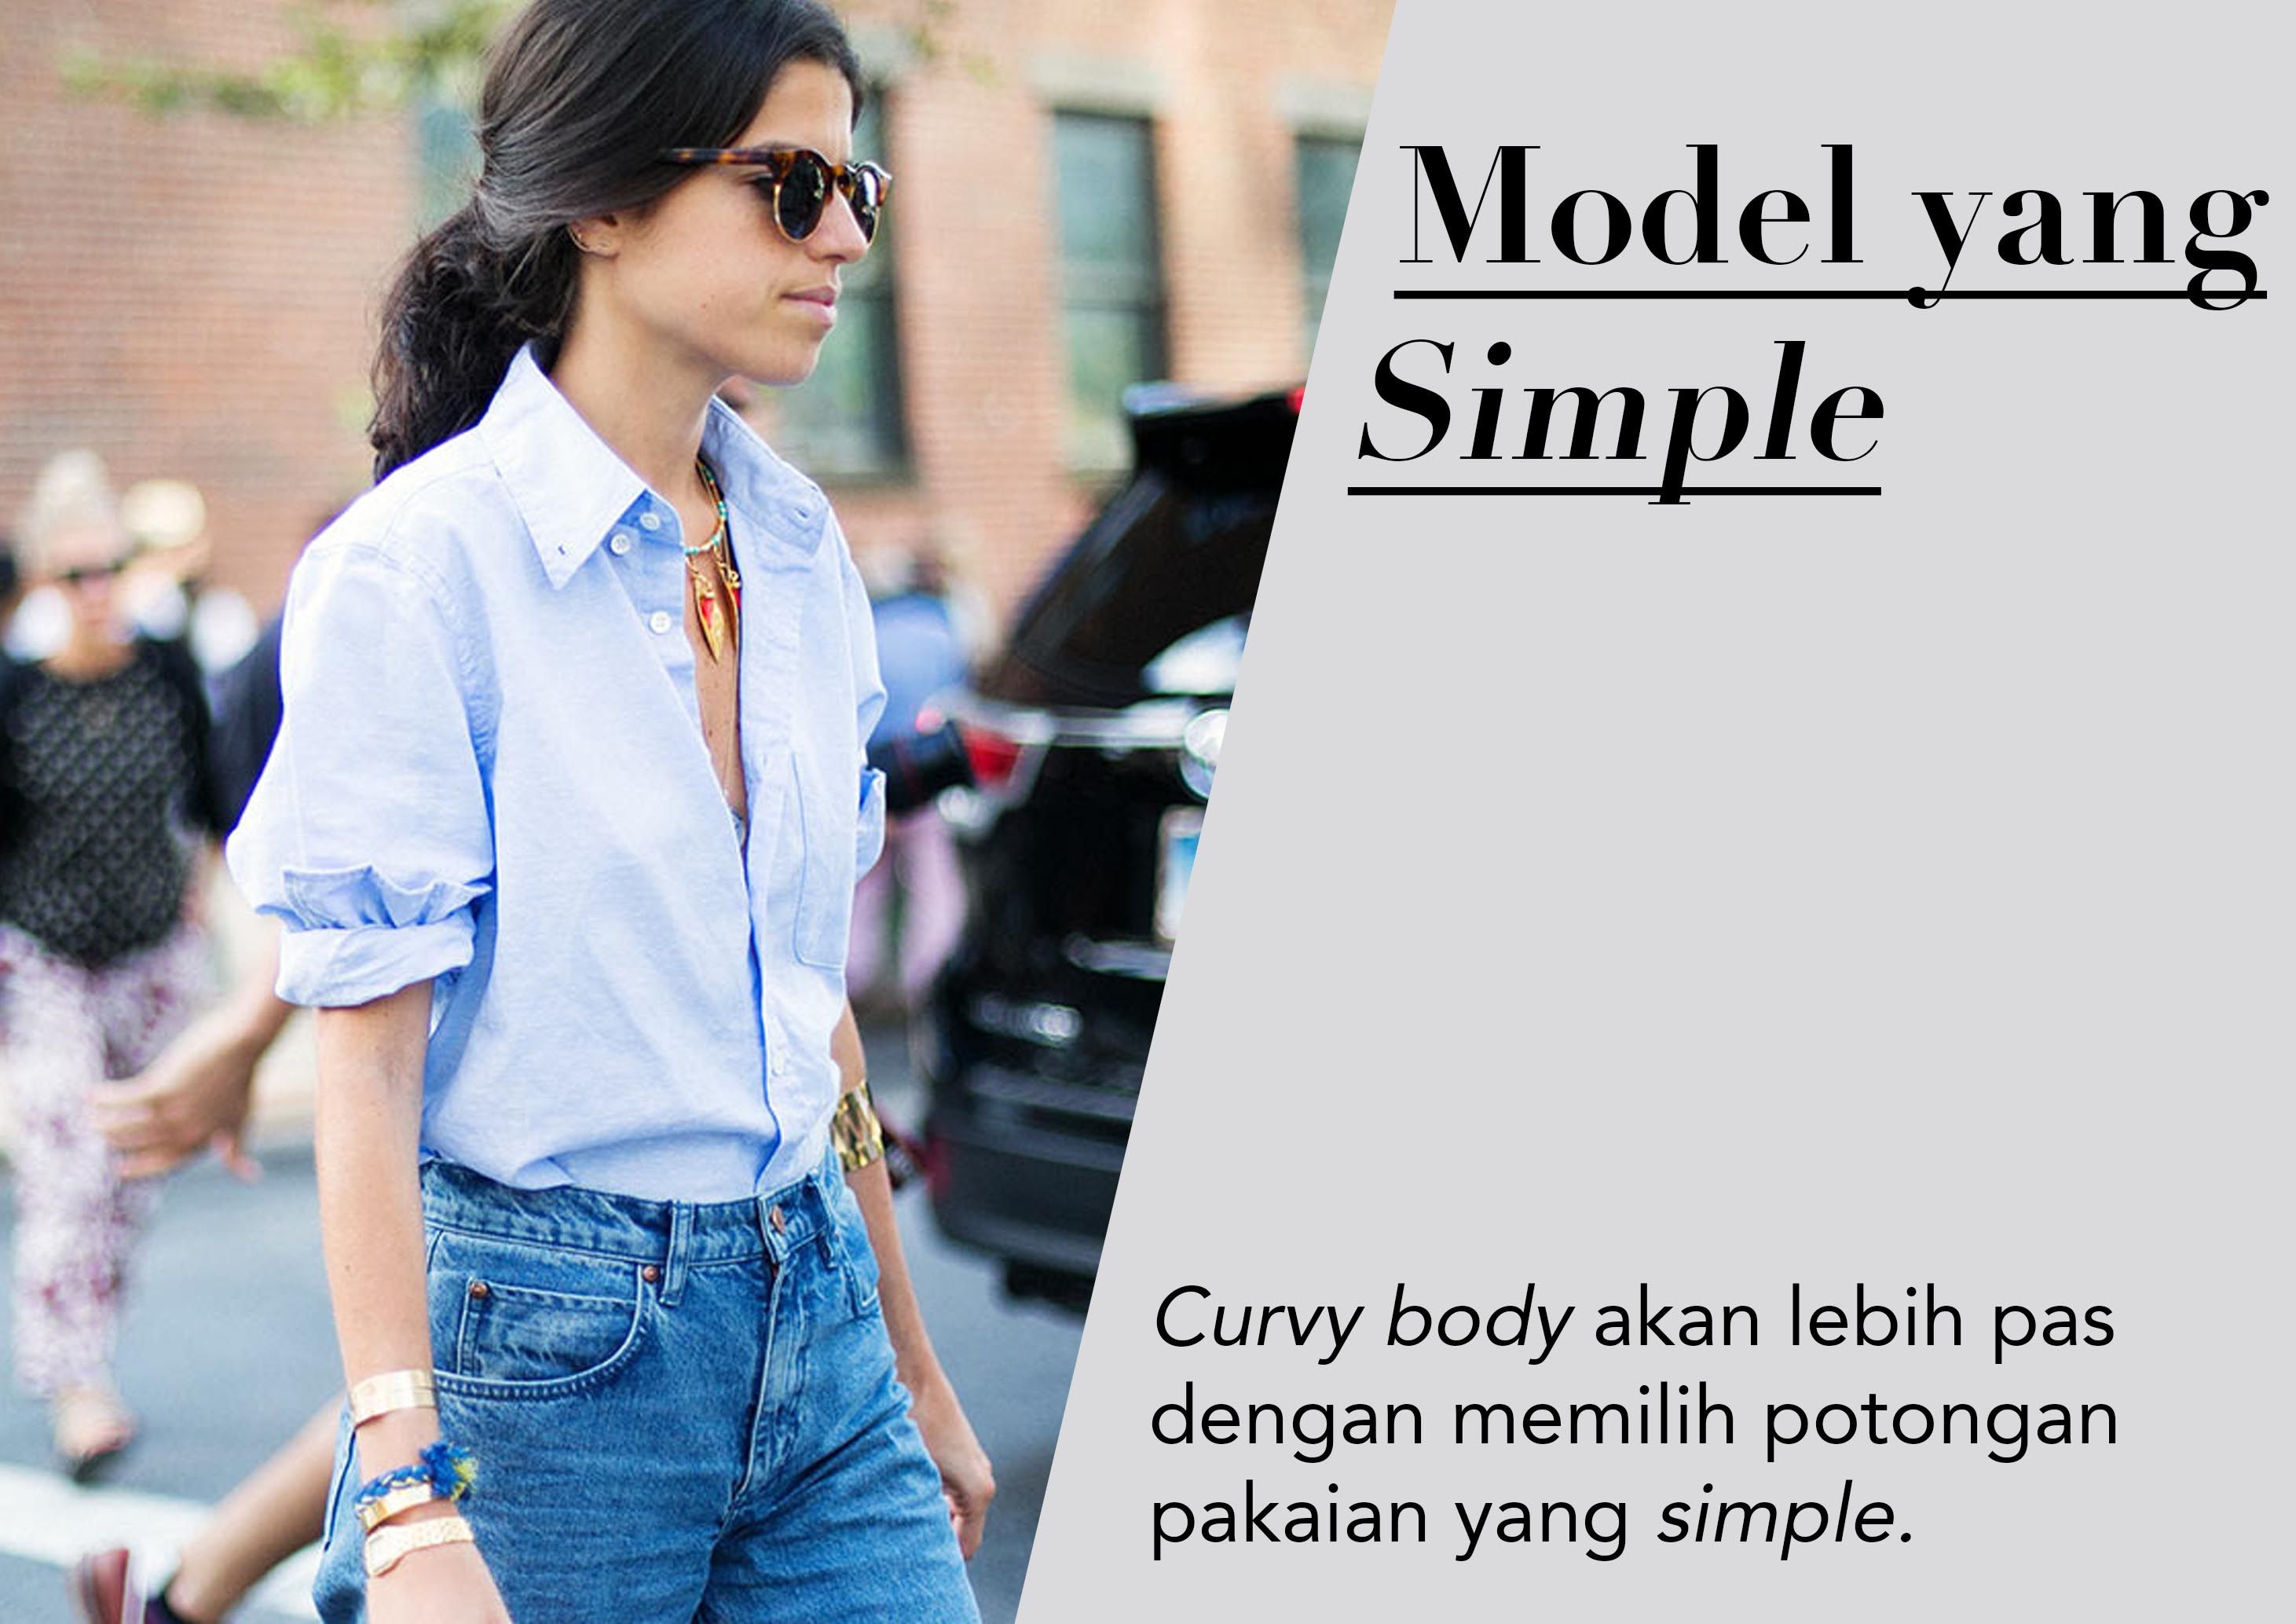 4 Tips For A Full Body To Be Slim When Relying On This Fashion Model